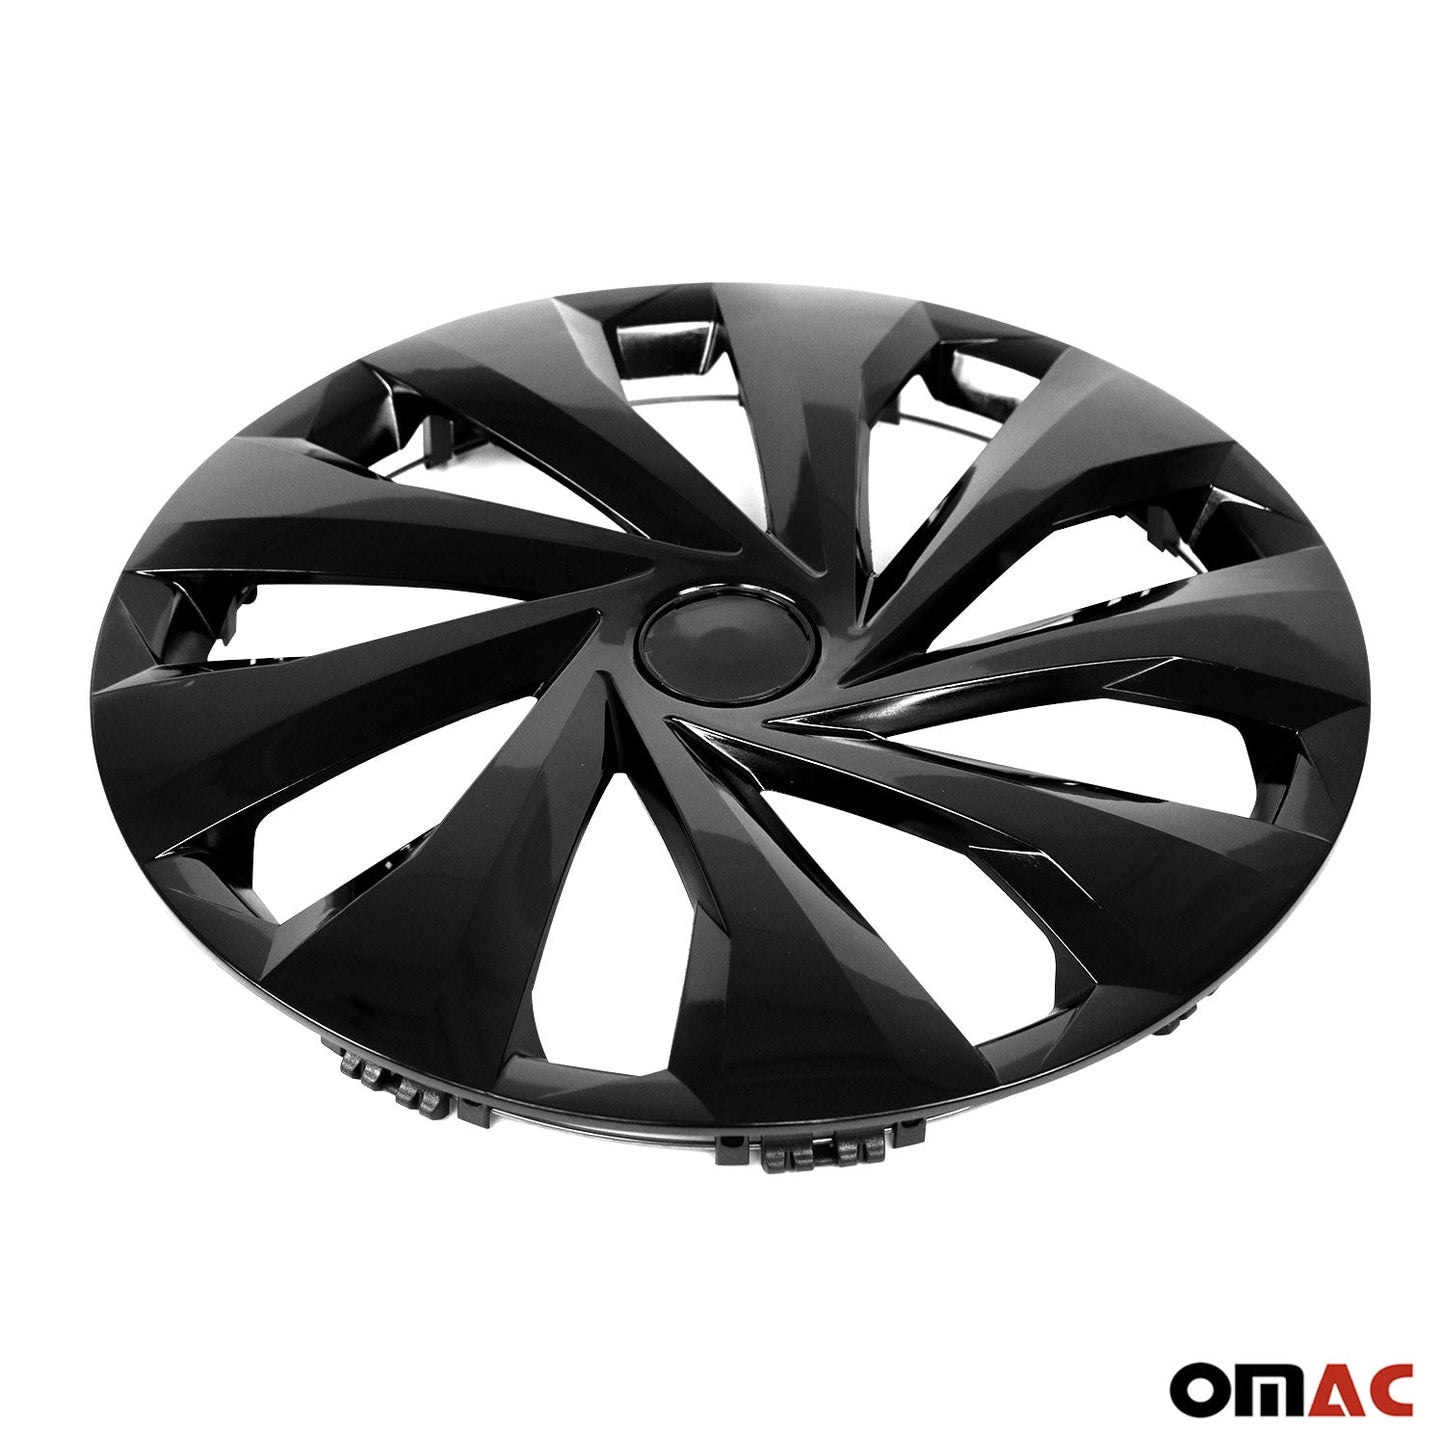 OMAC 15 Inch Wheel Covers Hubcaps for Mercedes ABS Black 4x G002465